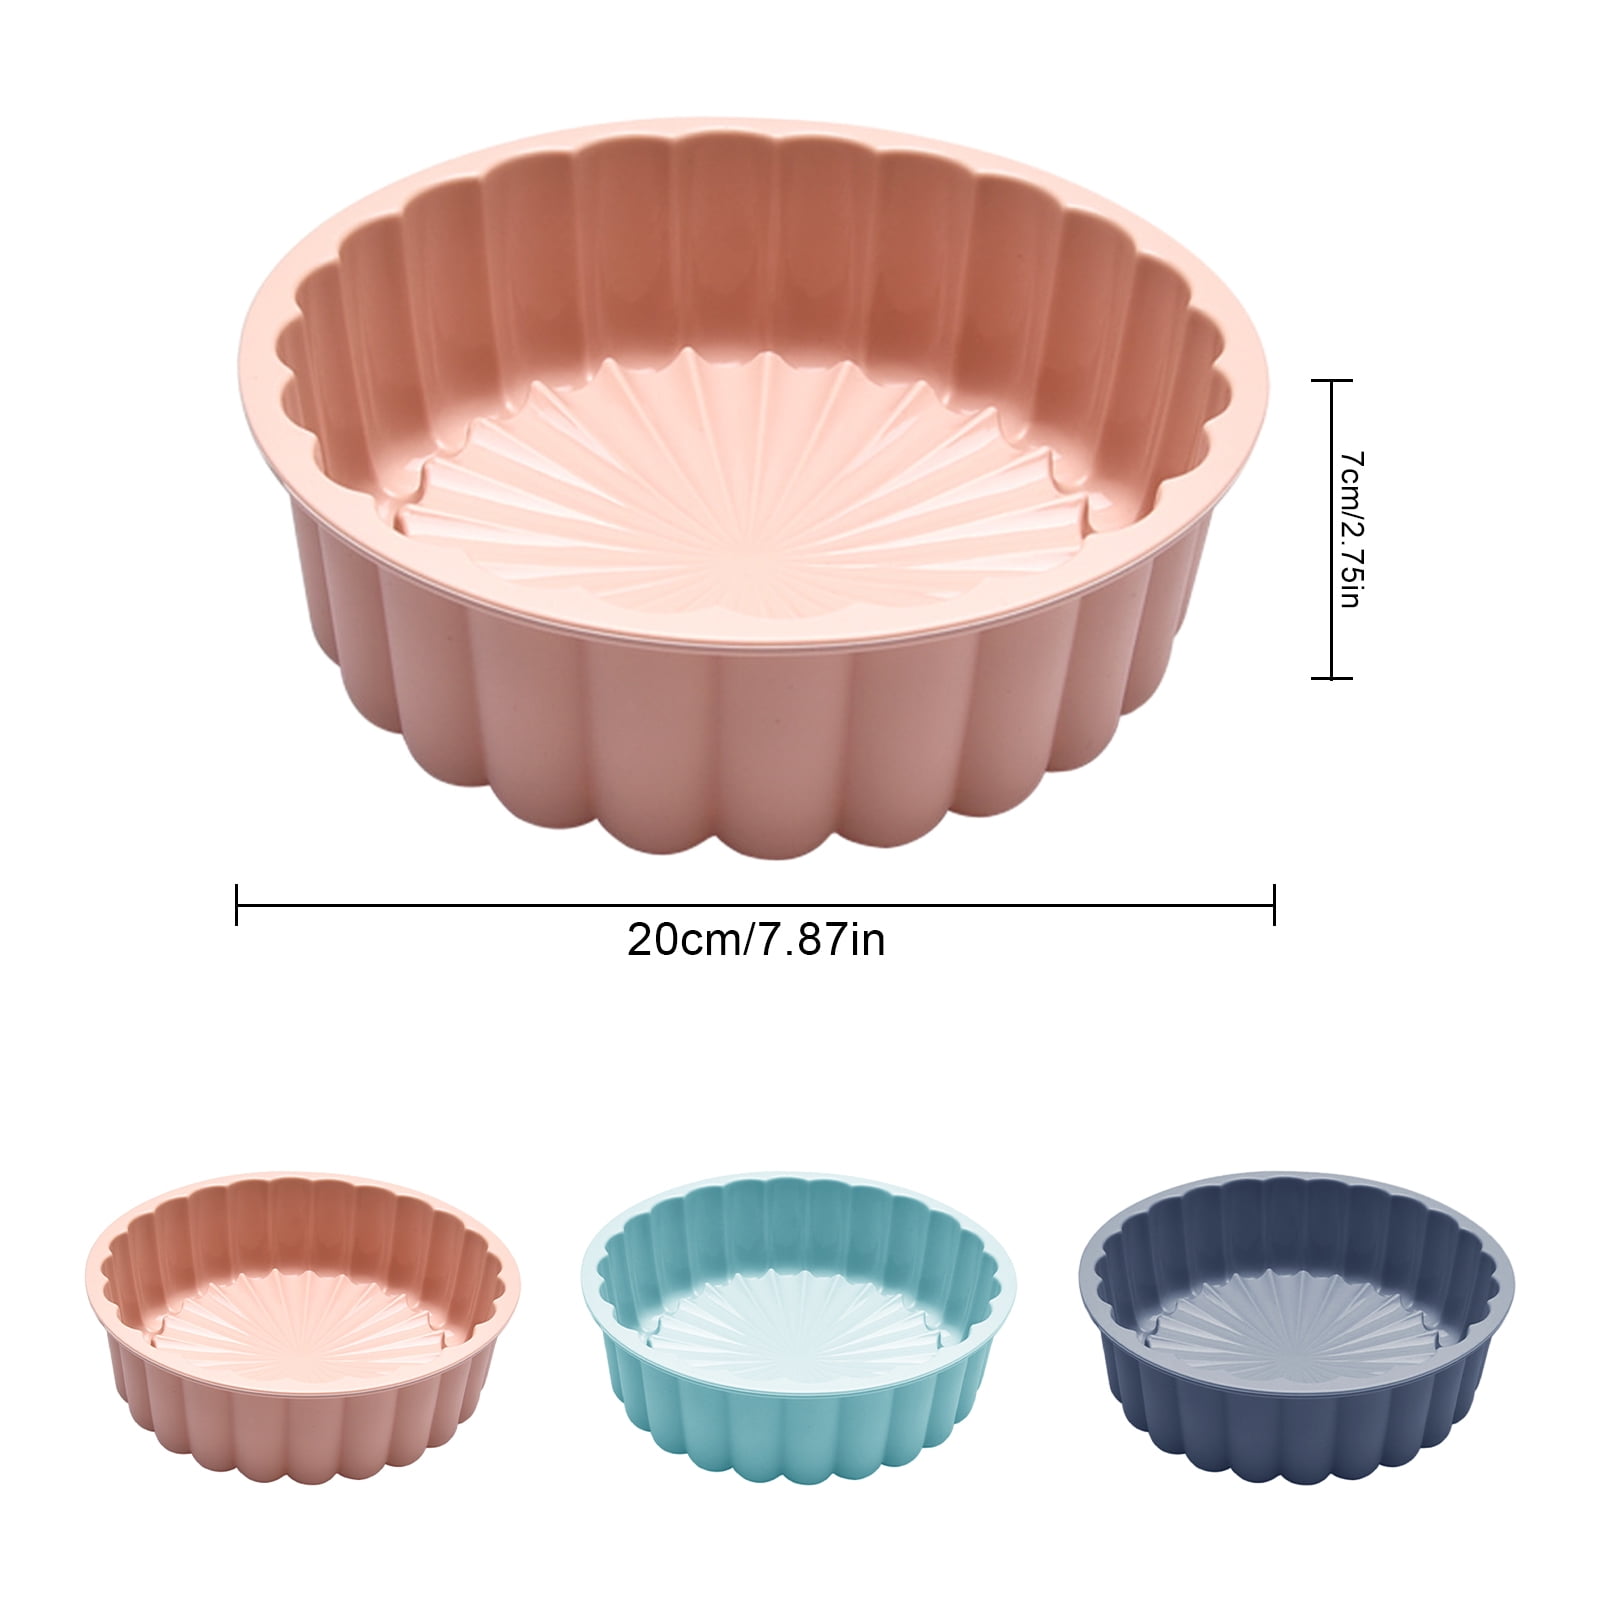 Dropship Silicone Round Pan Charlotte Cakes Baking Pan Sponge Flan Mold  Strawberry Shortcake Baking Pan Kitchen Silicone Moulds to Sell Online at a  Lower Price